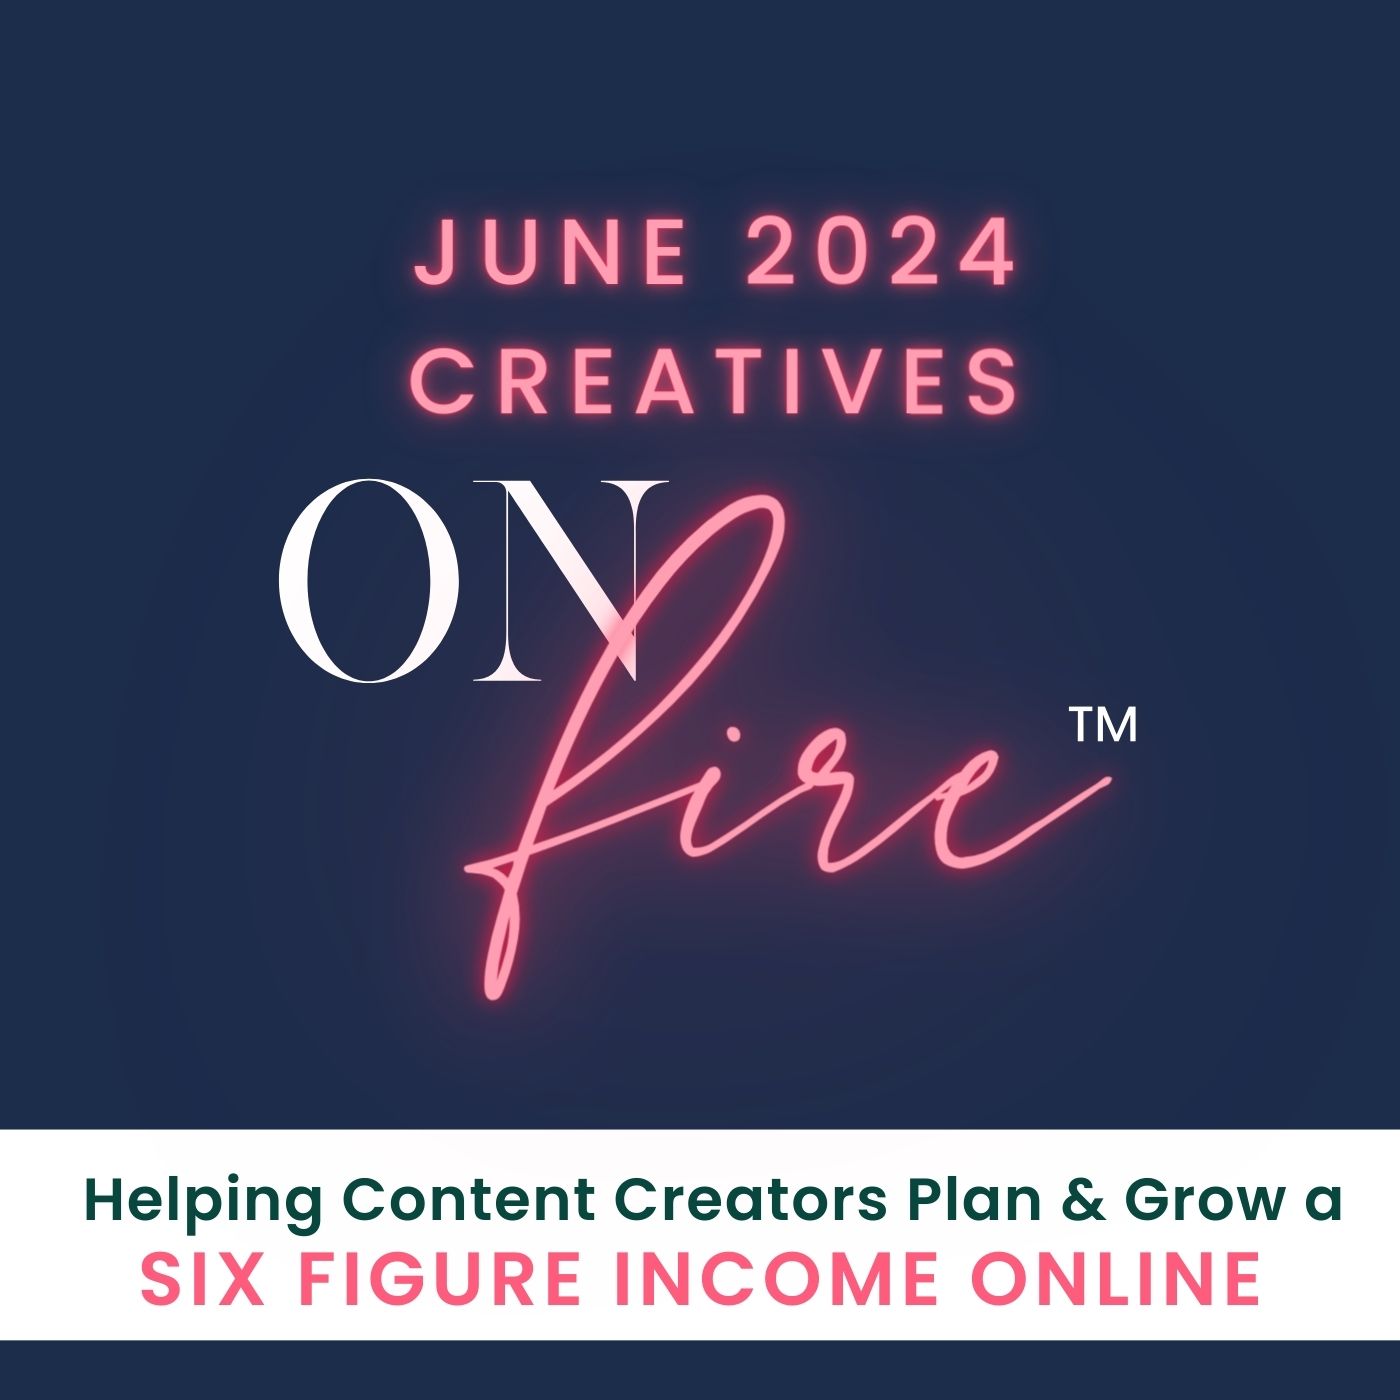 June 2024 Create Content You Would Want to Consume